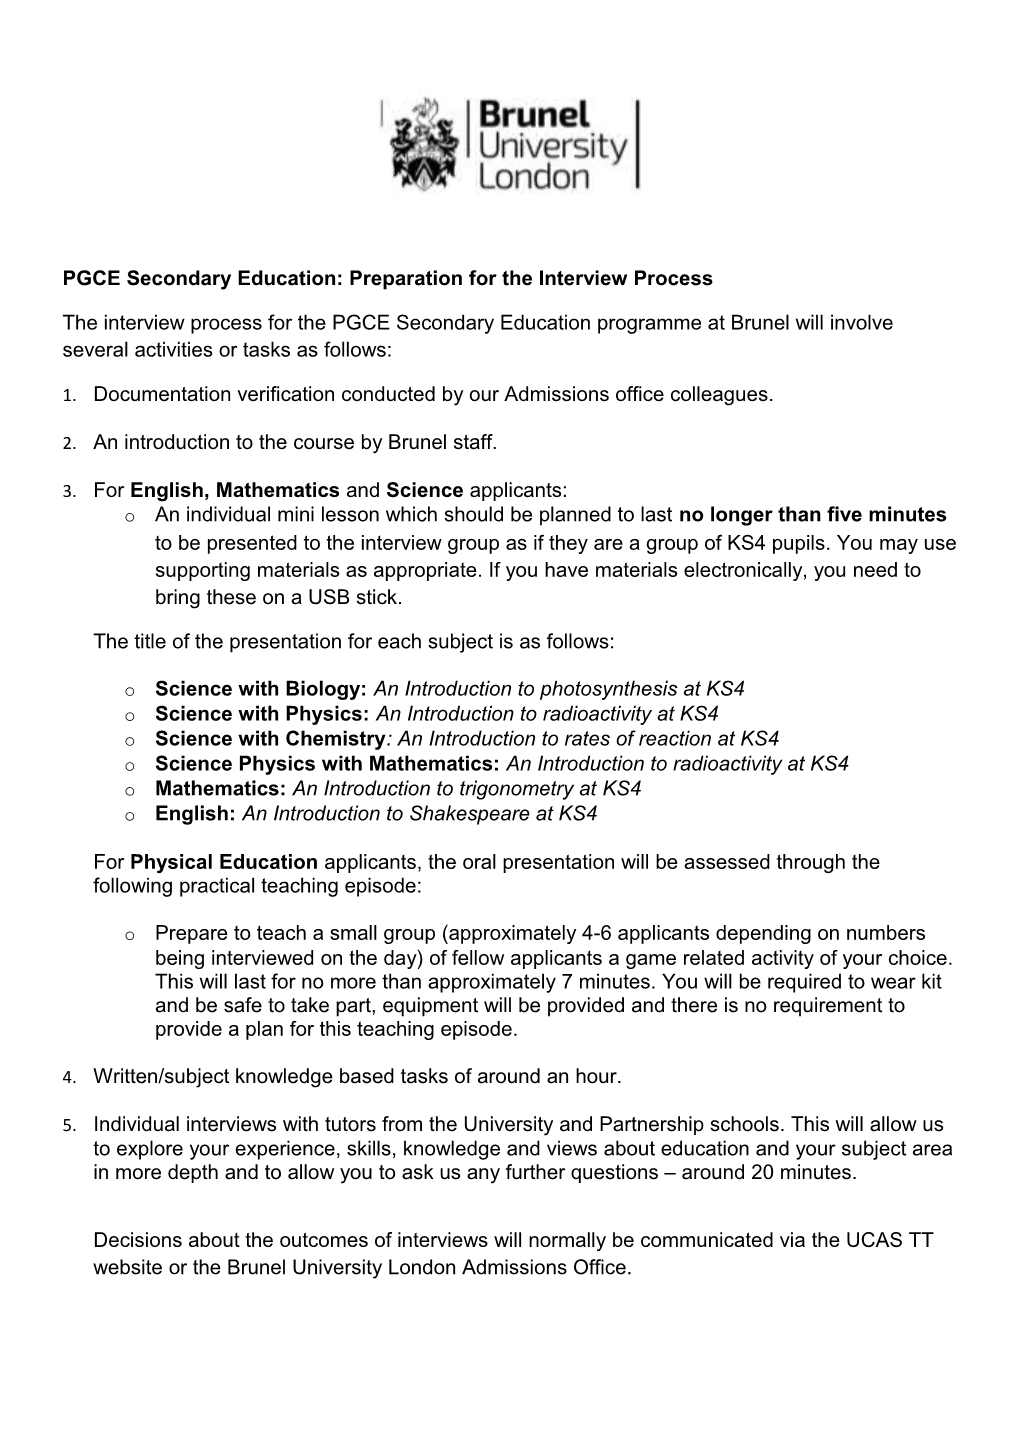 PGCE Secondary Education: Preparation for the Interview Process